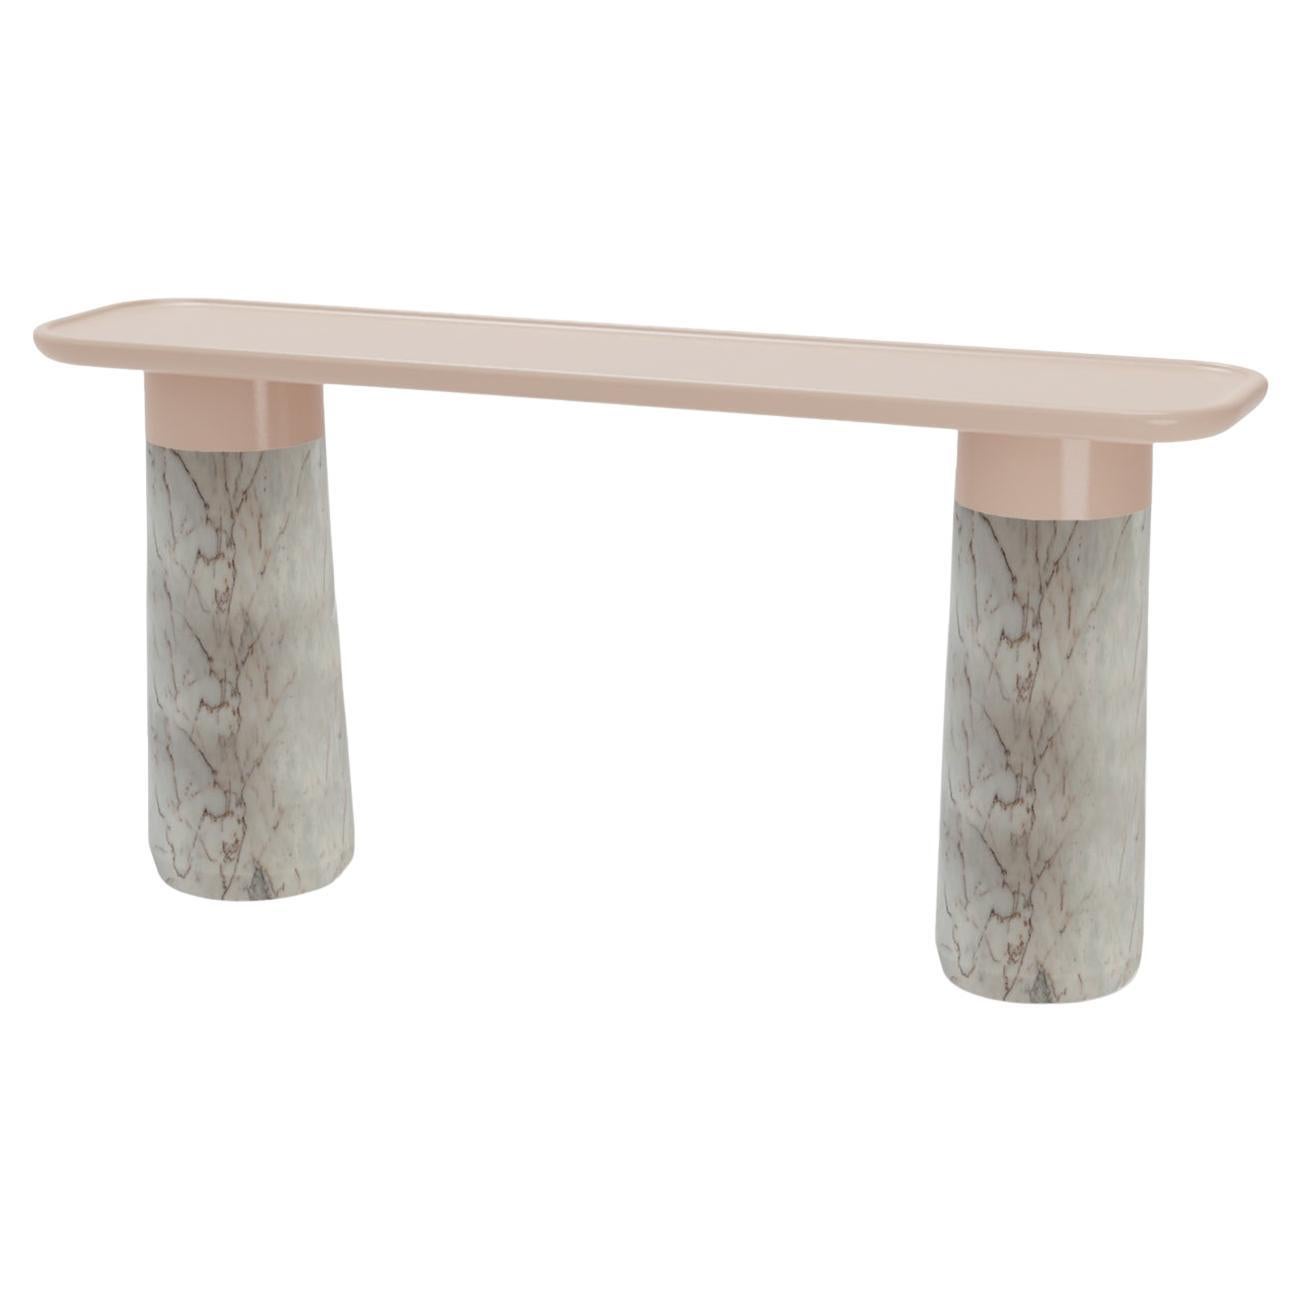 Portuguese Console Poppy with Nude Top and White Marble Base by Mambo